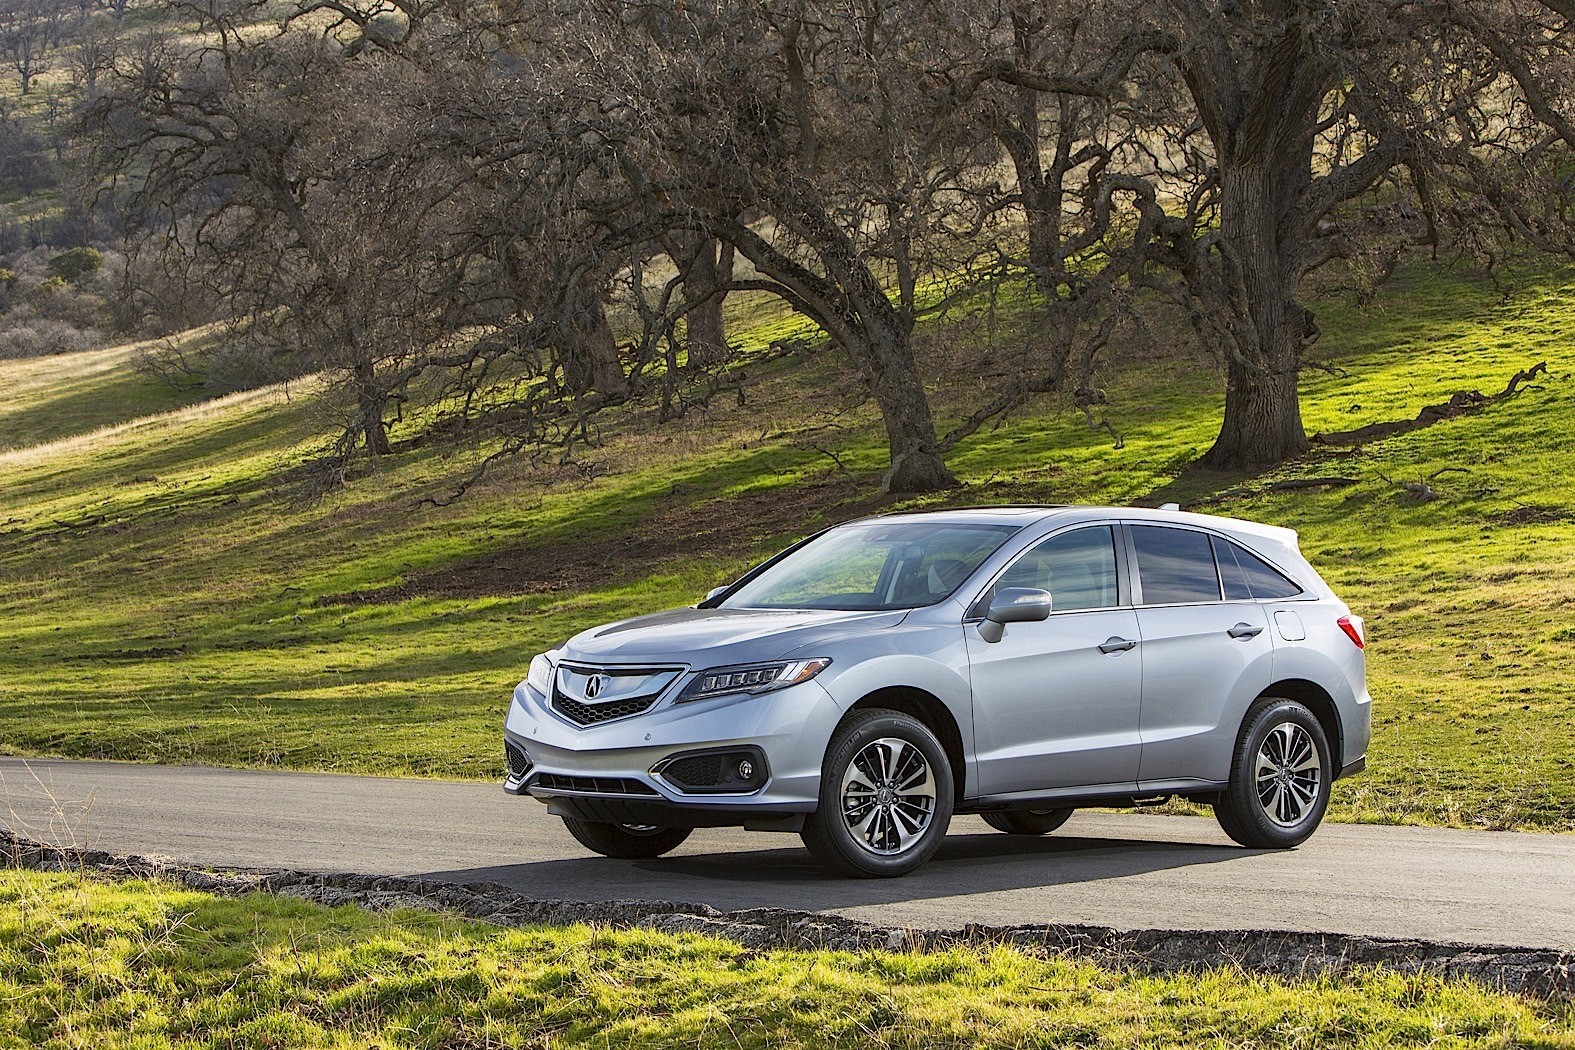 What is a crossover vehicle, and is it safer than an SUV?